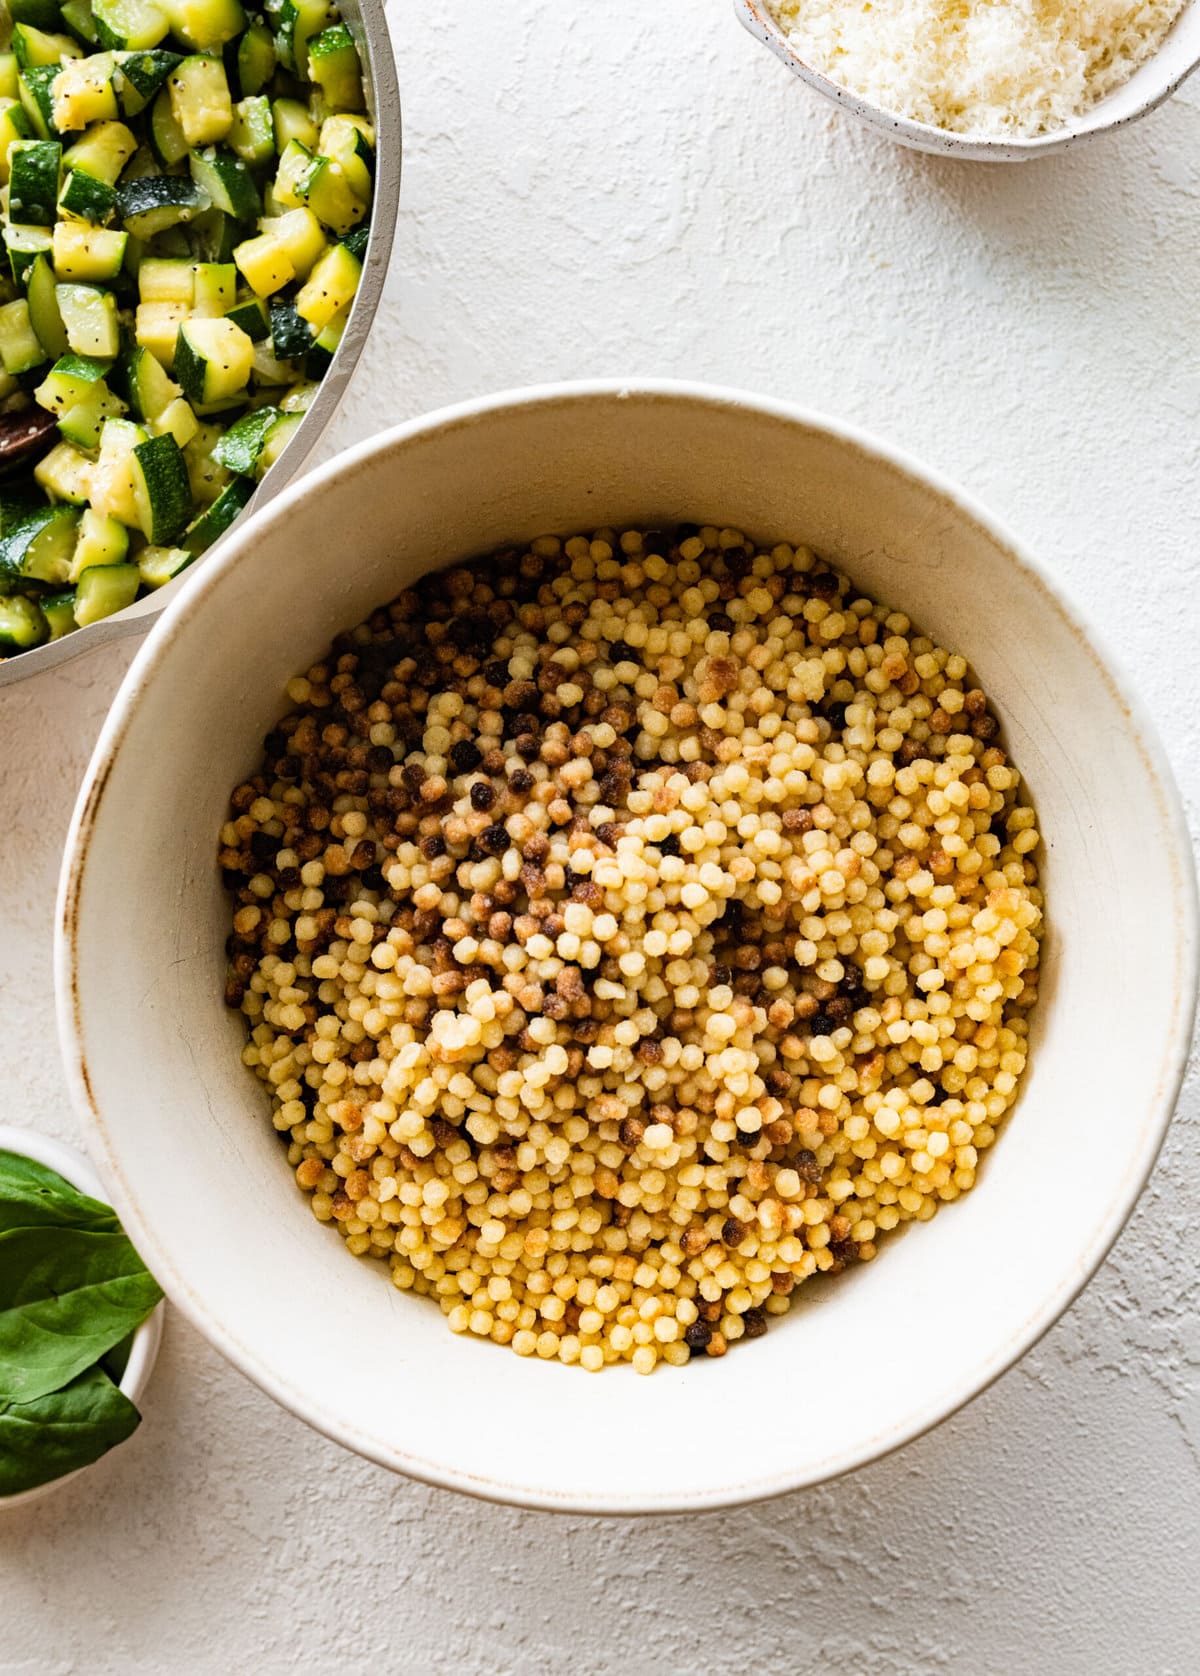 Step by step instructions Fregola Sarda Pasta Recipe with Zucchini and Cheese- cook fregola al dente.